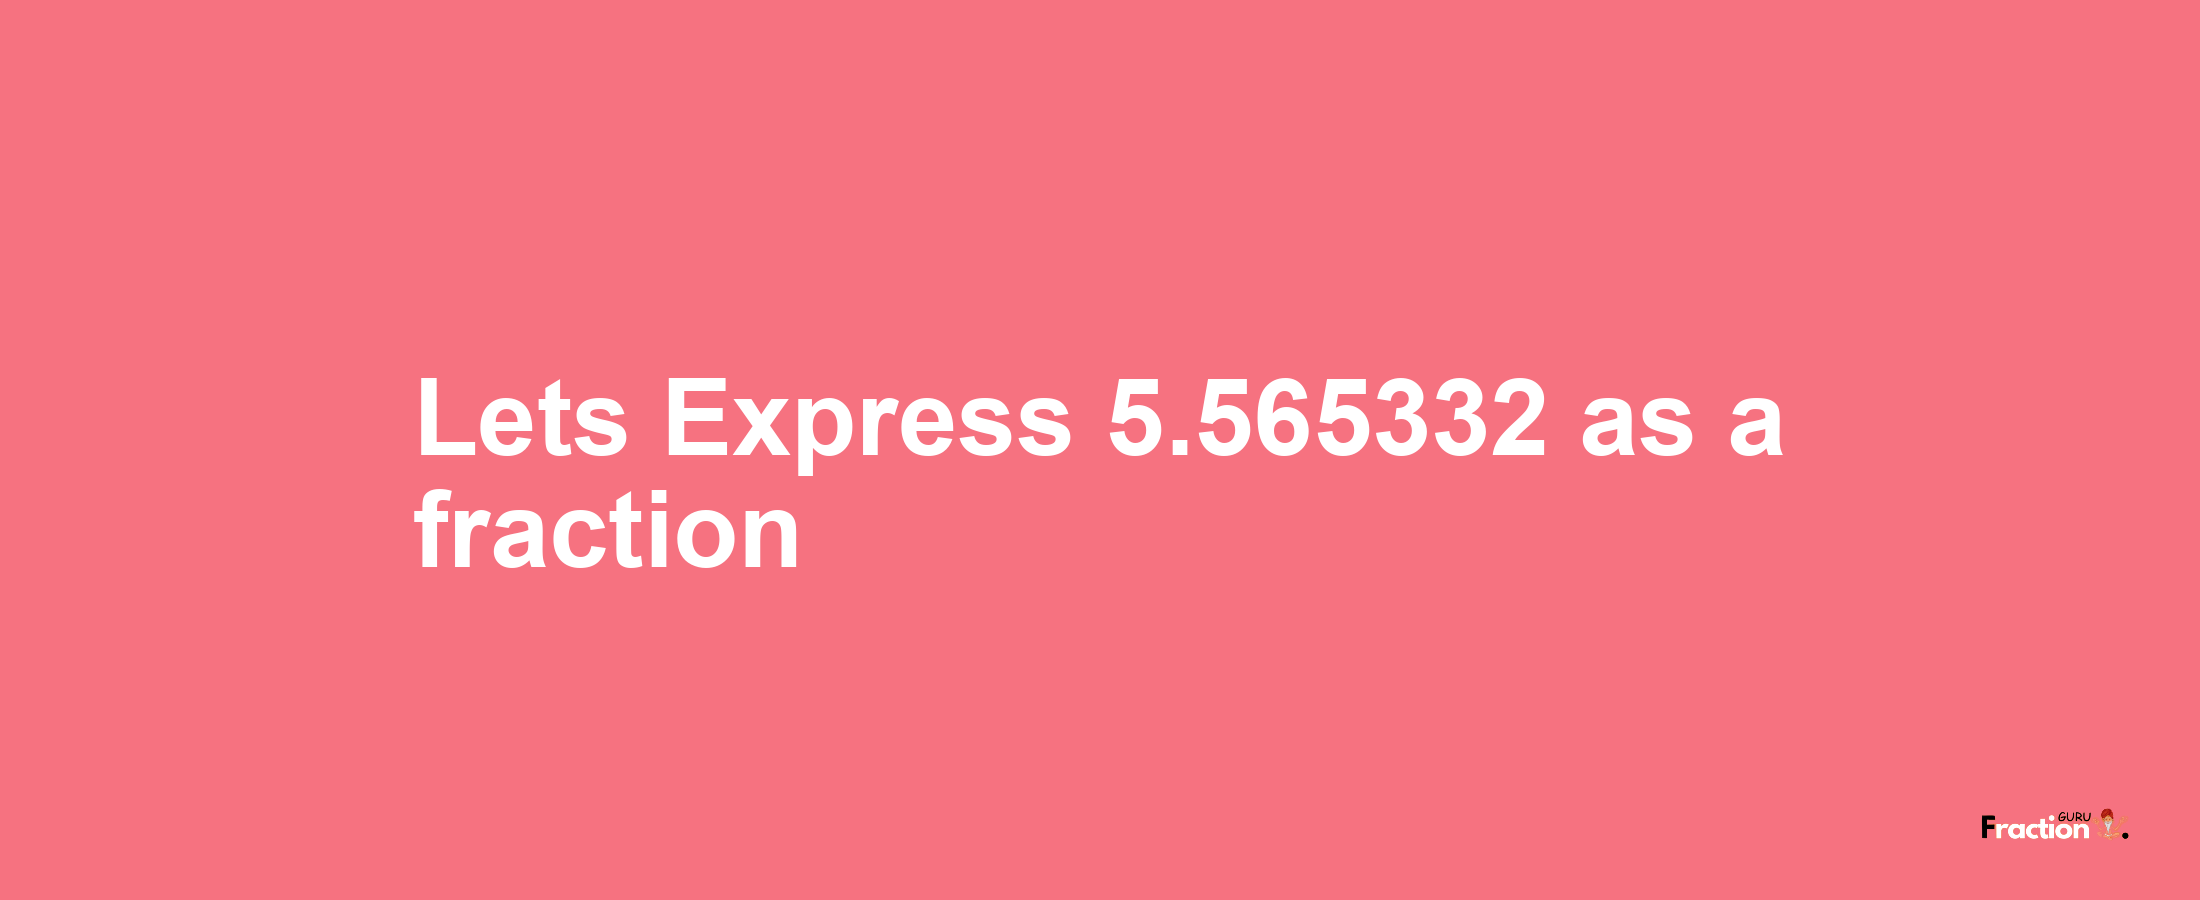 Lets Express 5.565332 as afraction